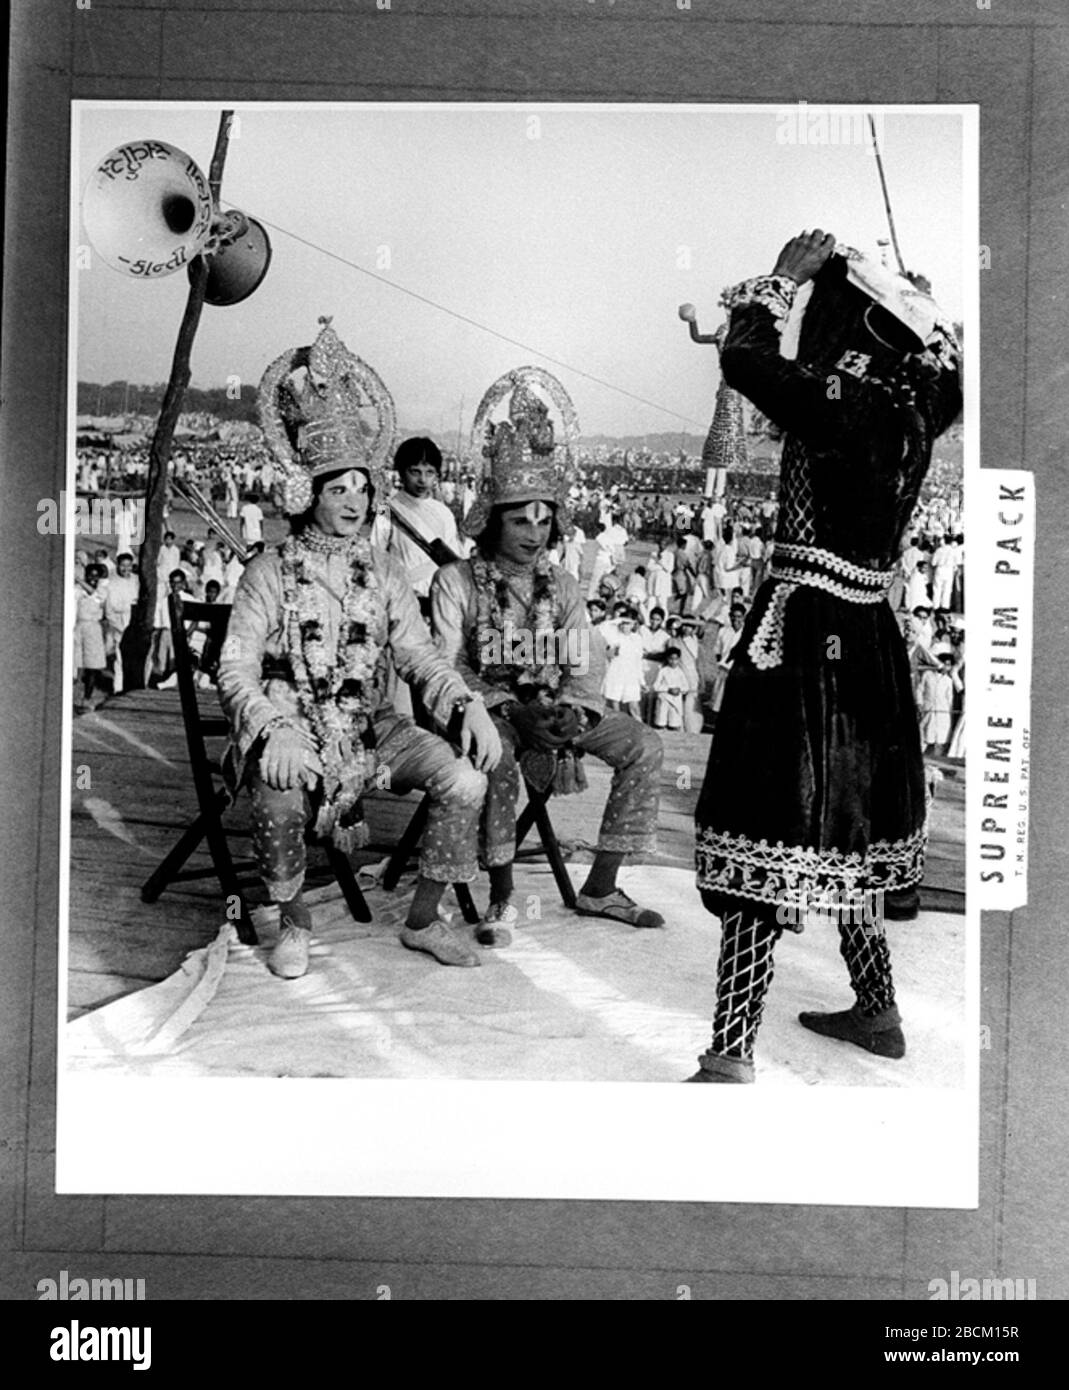 'English: DPD/Aug.49, A37bA scene from the Ramayan pageant enacted on the Mainden during the celebrations. Shri Ram and Lakshman are receiving emissery from Vibhishana, the brother of Ravan. Photo Number:-10811; August 1949; http://photodivision.gov.in/writereaddata/webimages/thumbnails/10811.jpg; Photo Division, Government of India; ' Stock Photo